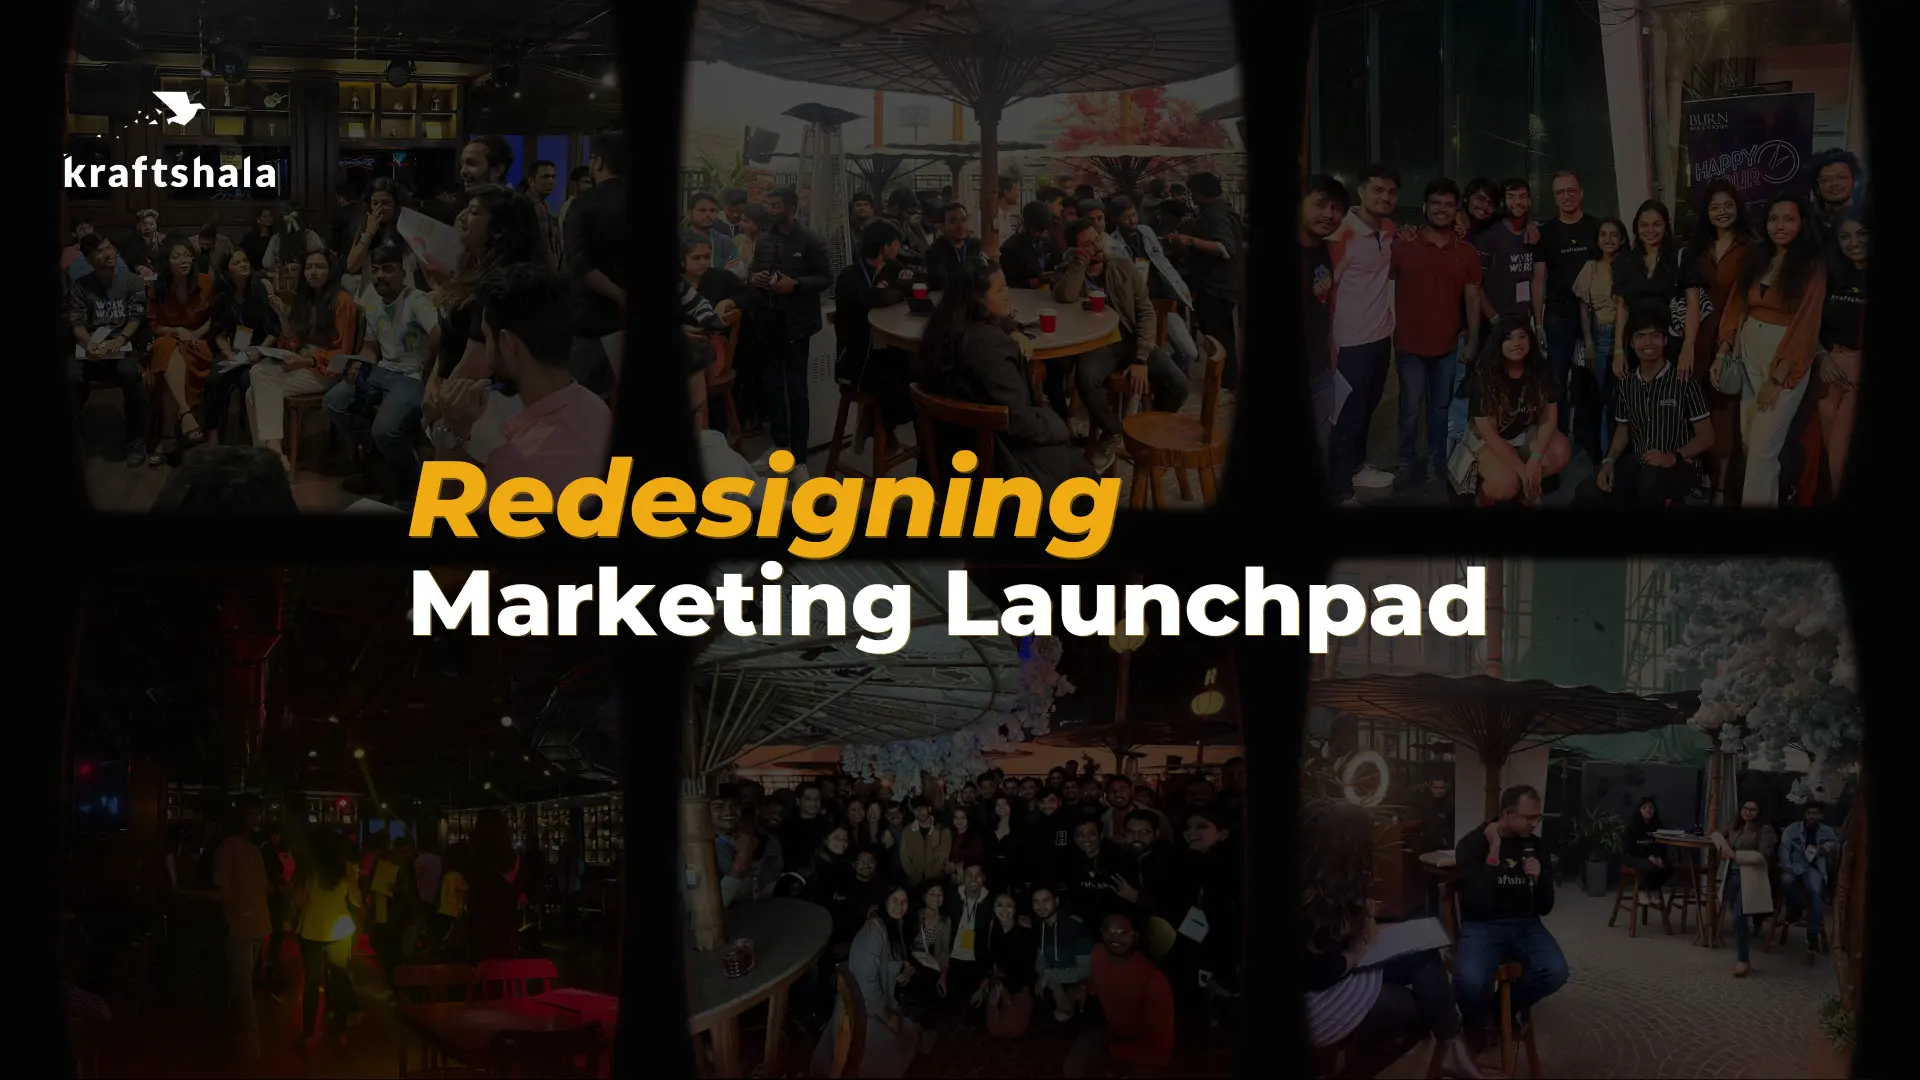 The Marketing Launchpad Gets A Redesign